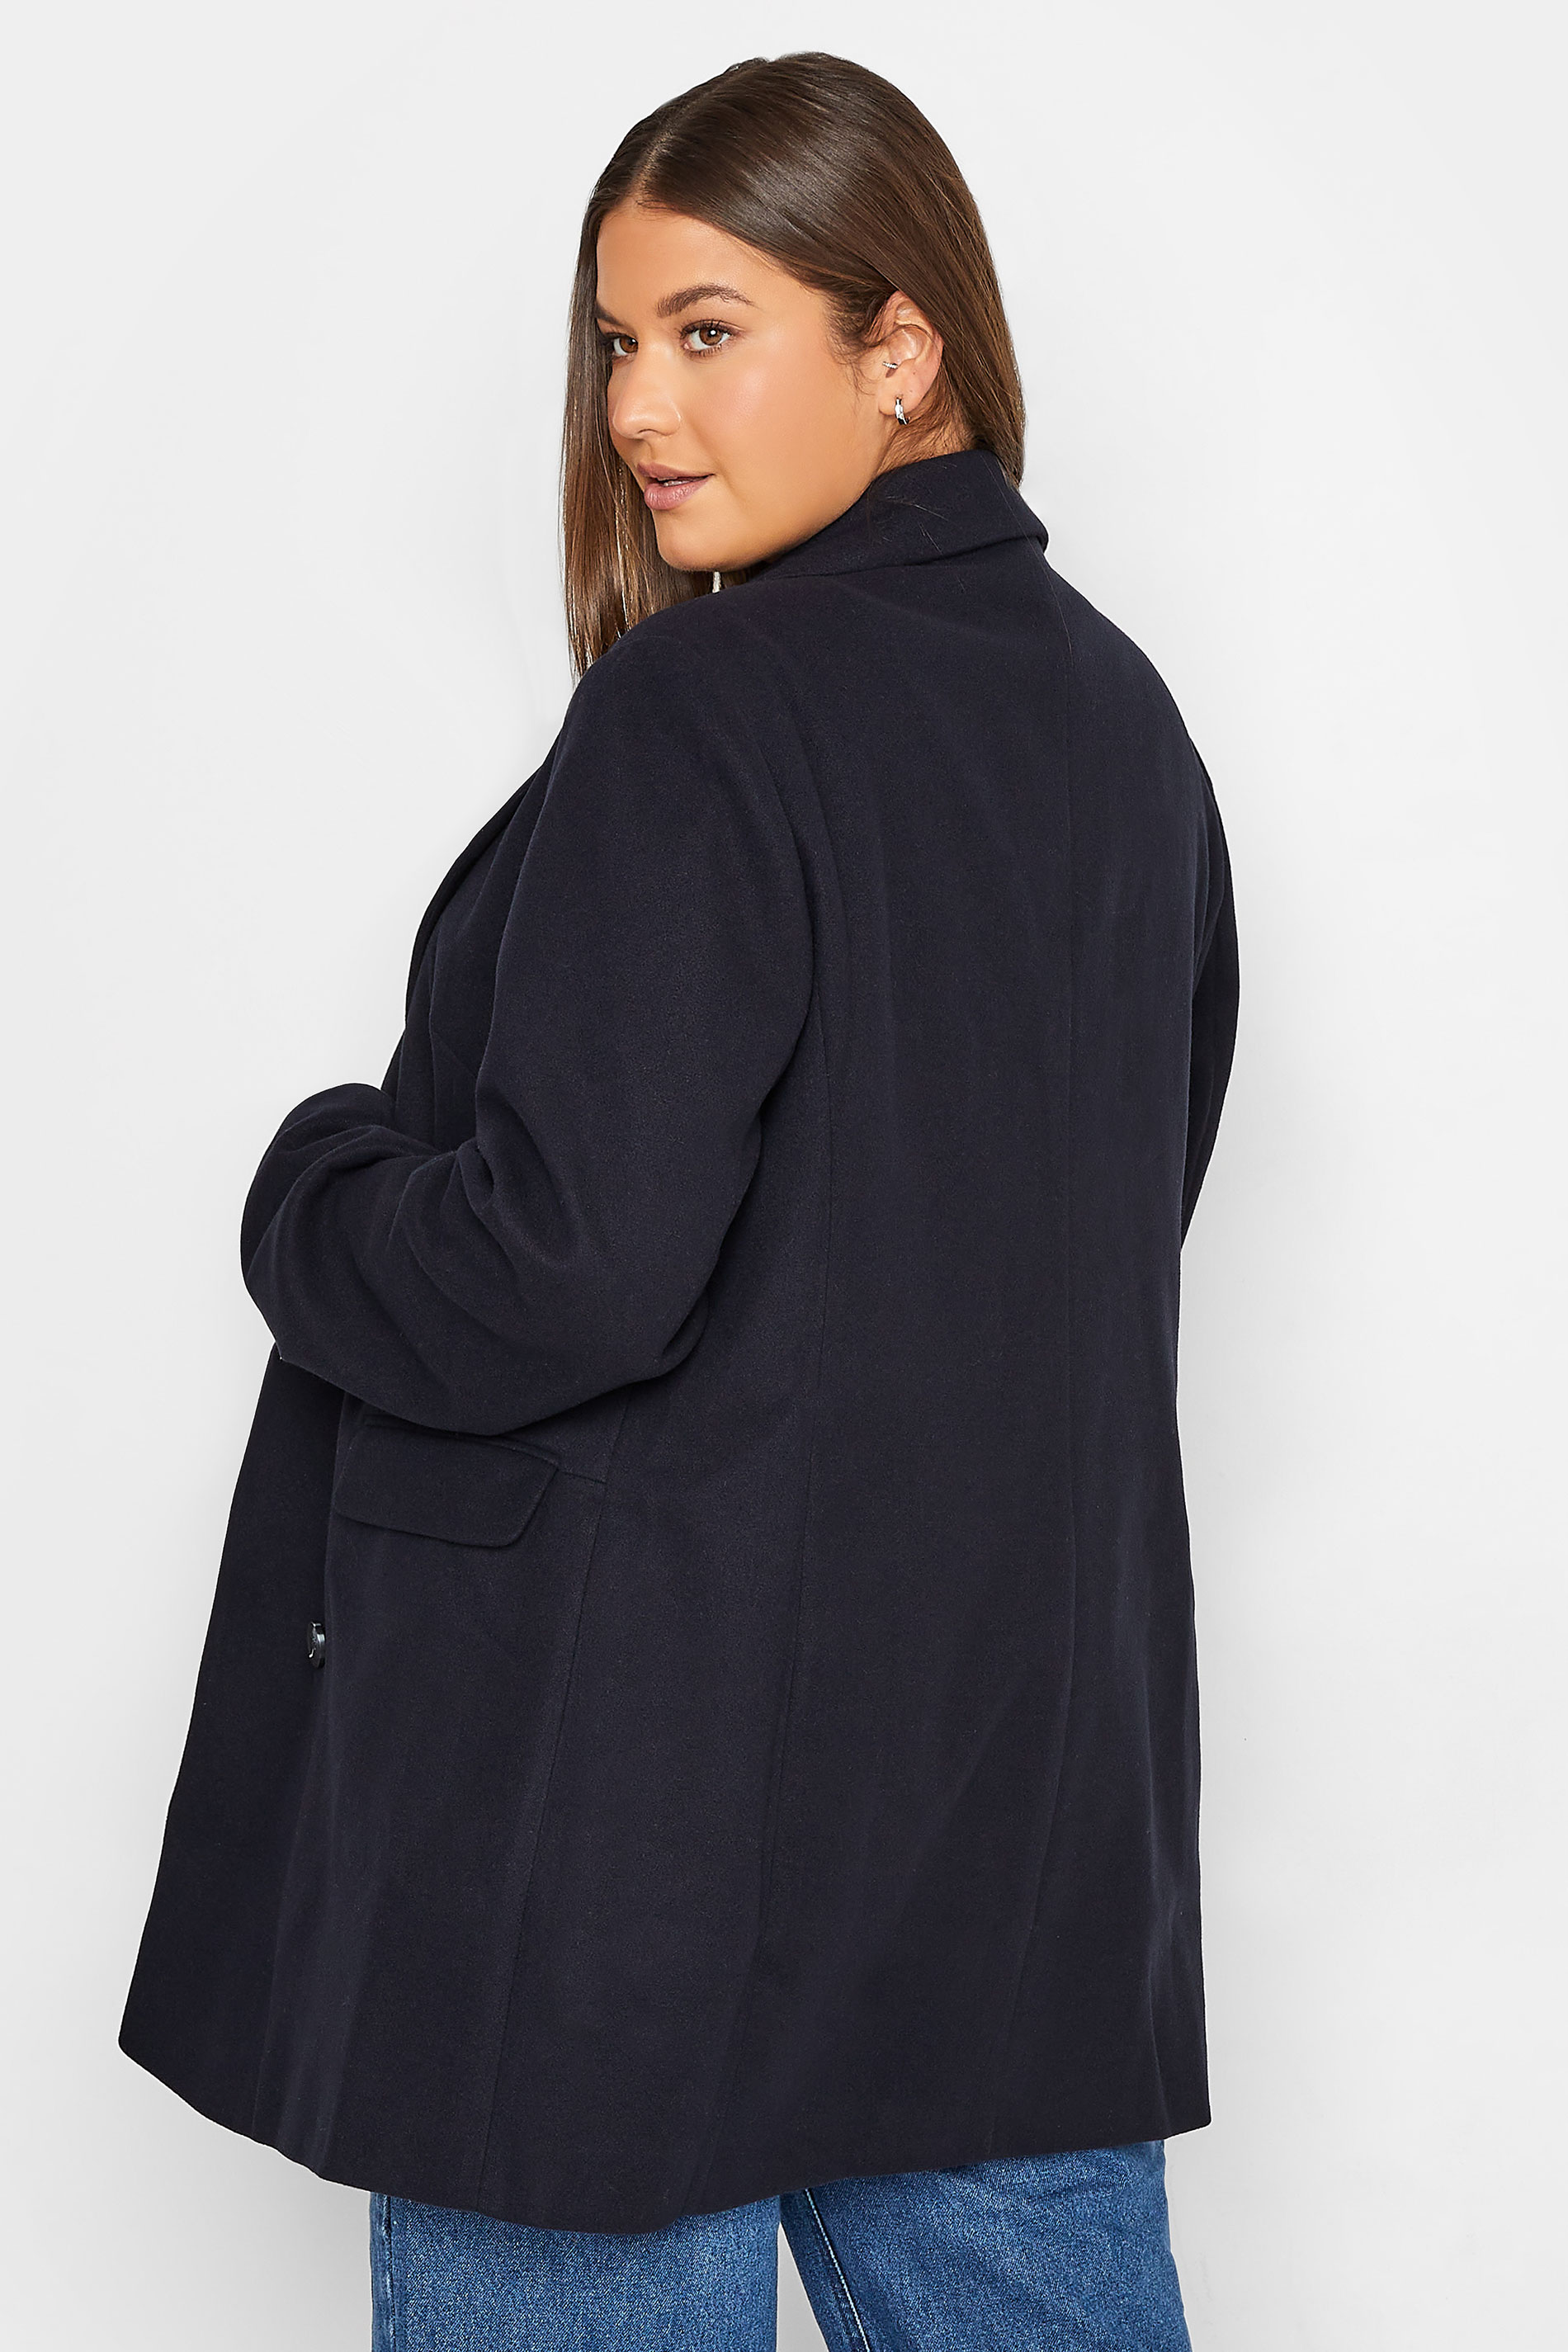 LTS Tall Women's Navy Blue Double Breasted Brushed Jacket | Long Tall Sally 3